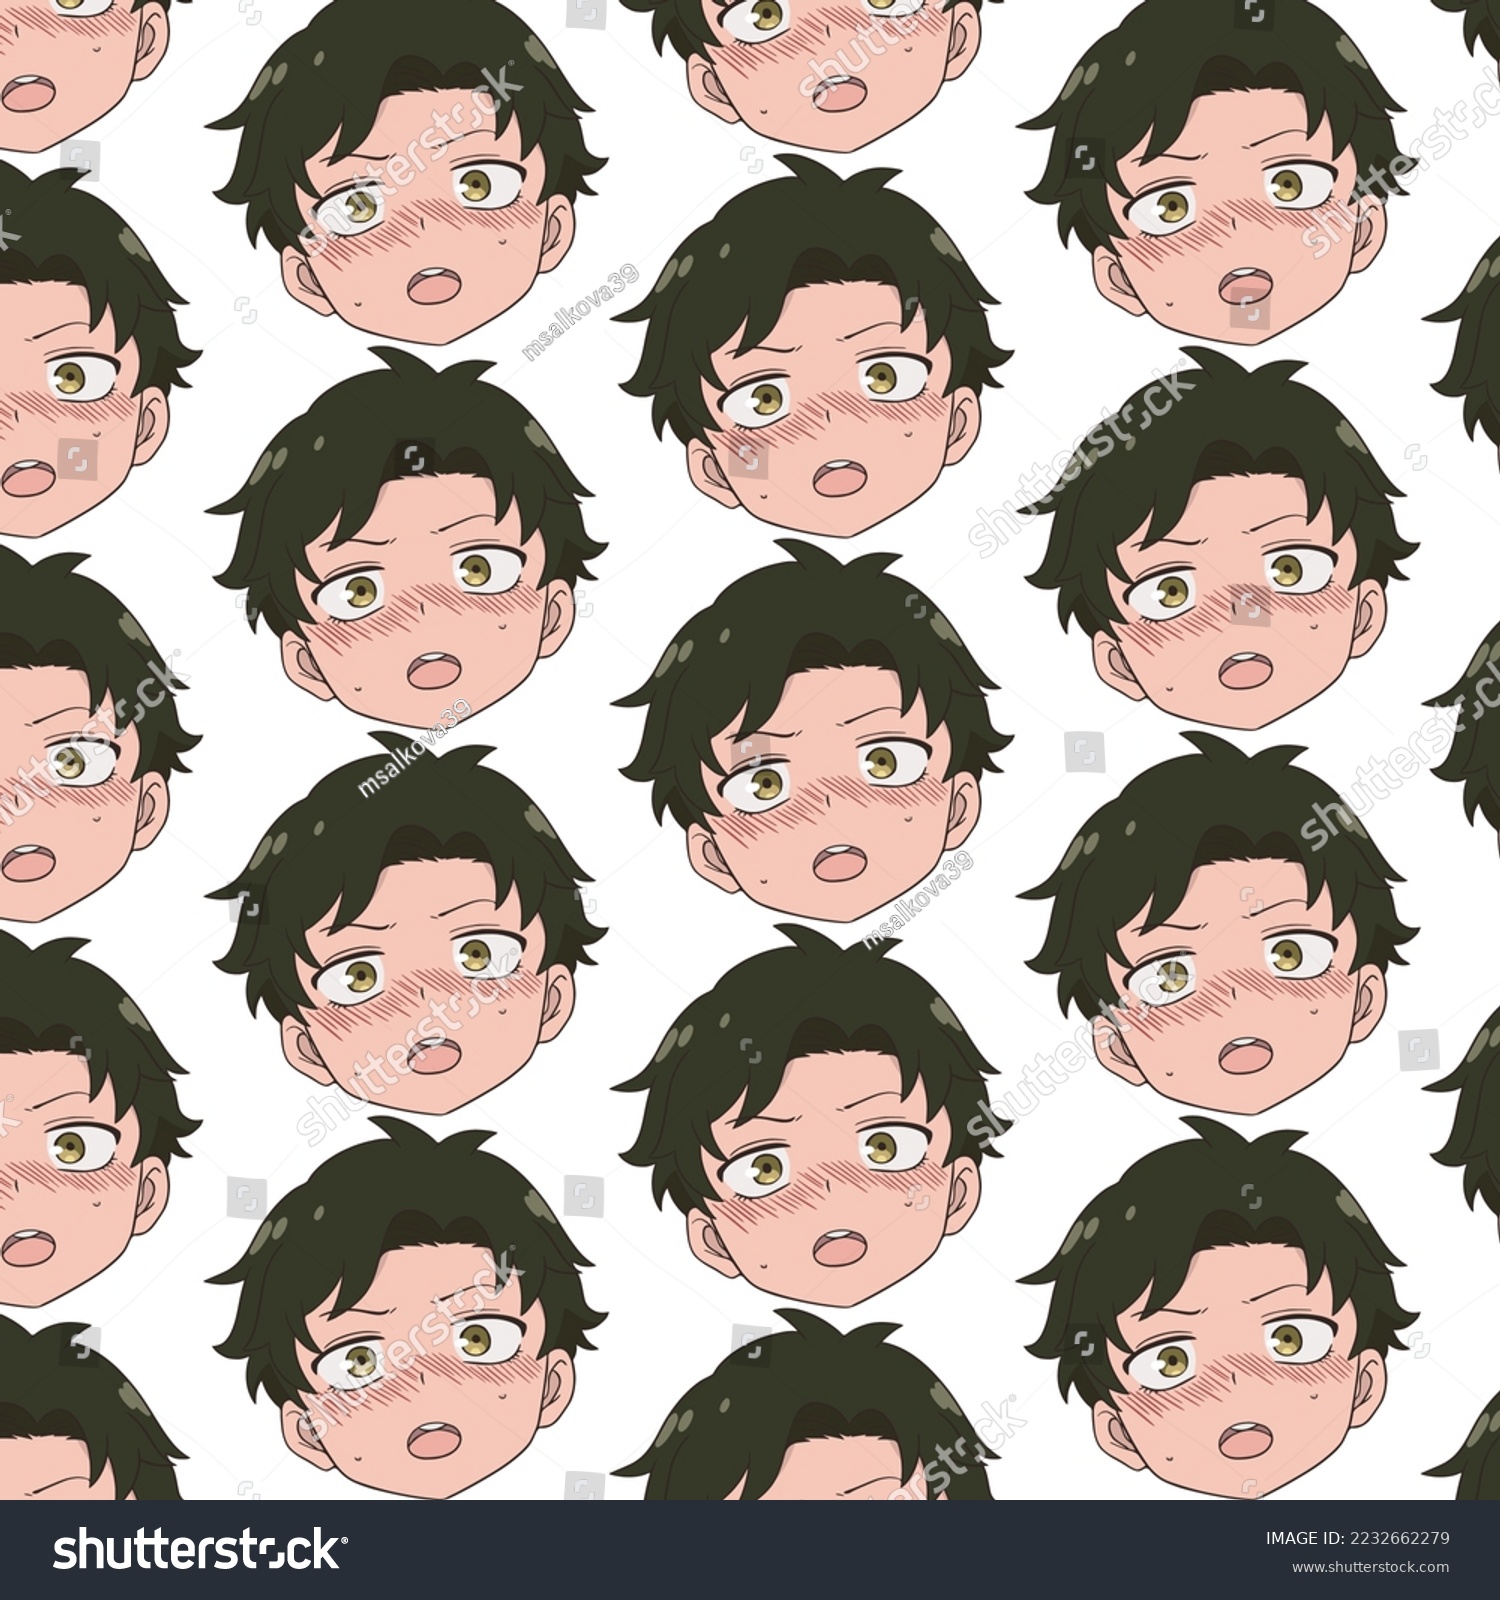 SVG of Boy with green hair and golden eyes, he looks straight ahead, embarrassed, red blush on his cheeks, pattern svg